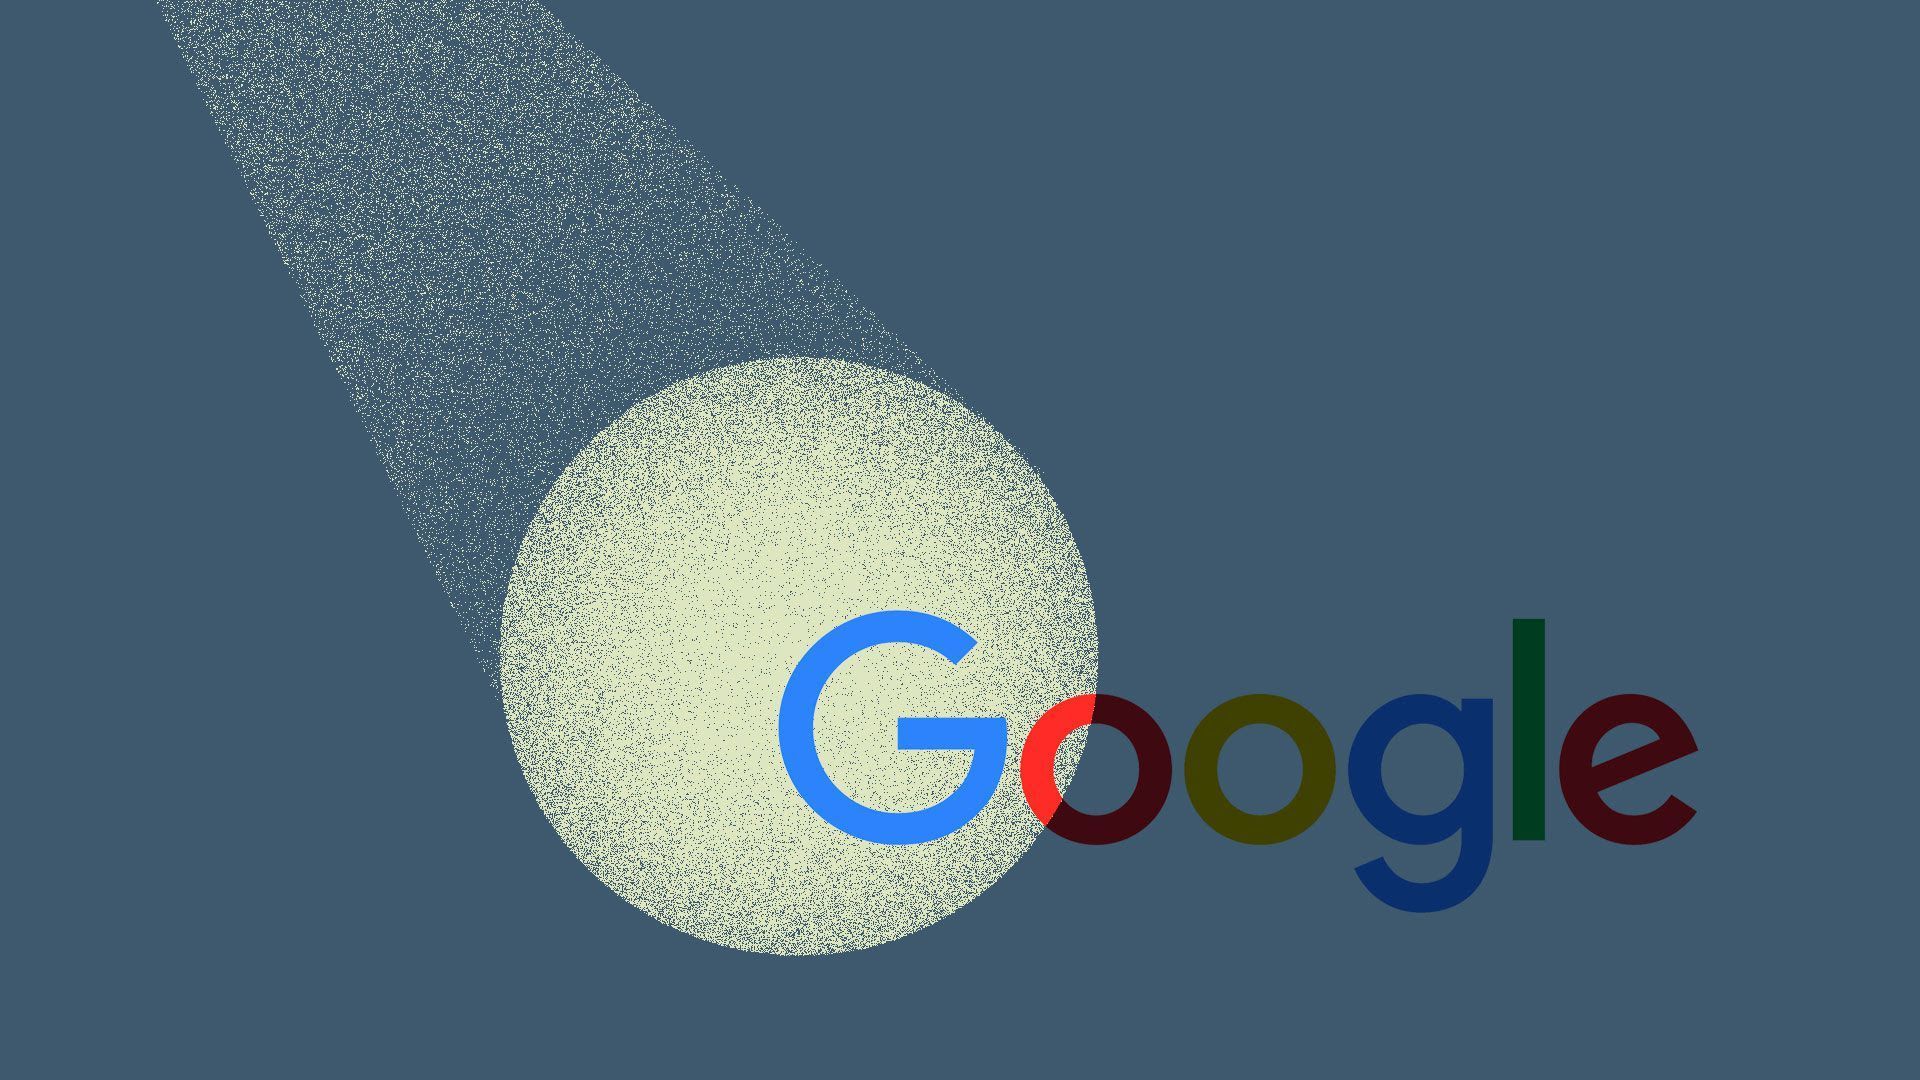 Illustration of the Google logo with a spotlight shining on it.